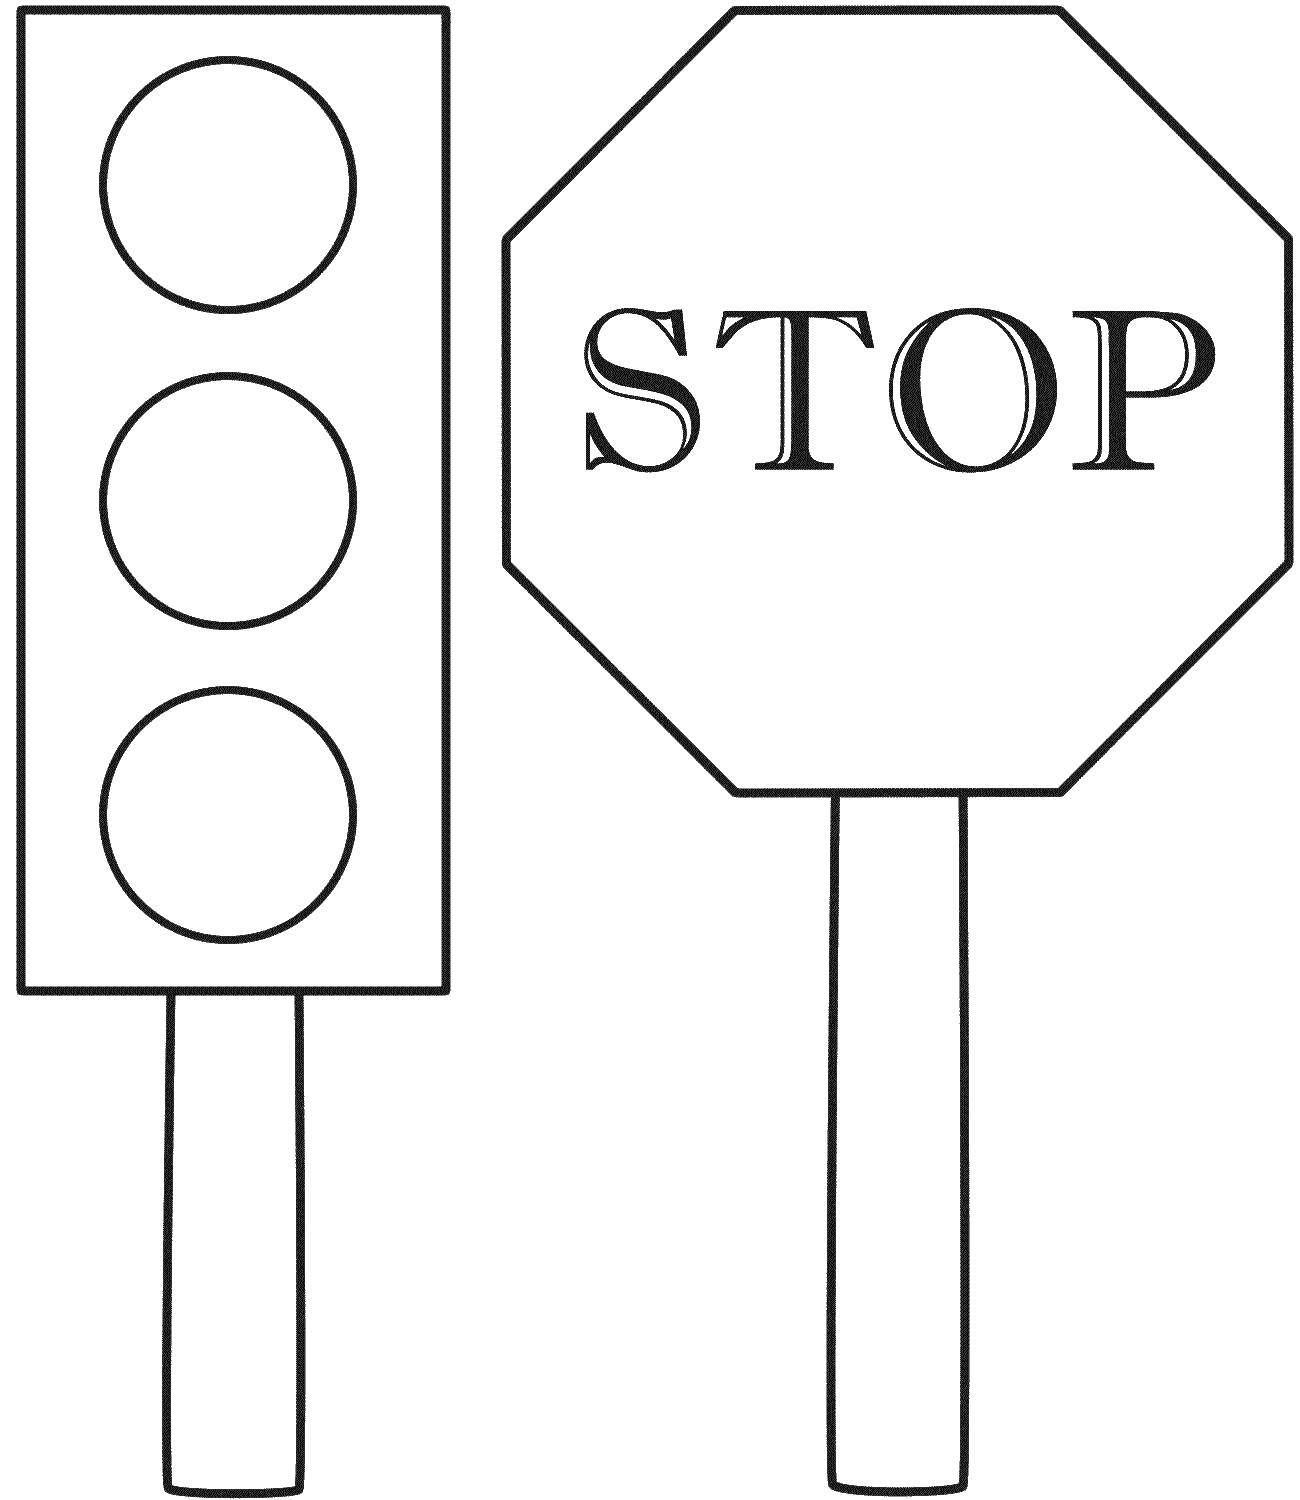 Coloring Stop and traffic light. Category rules of the road. Tags:  stop, traffic light.